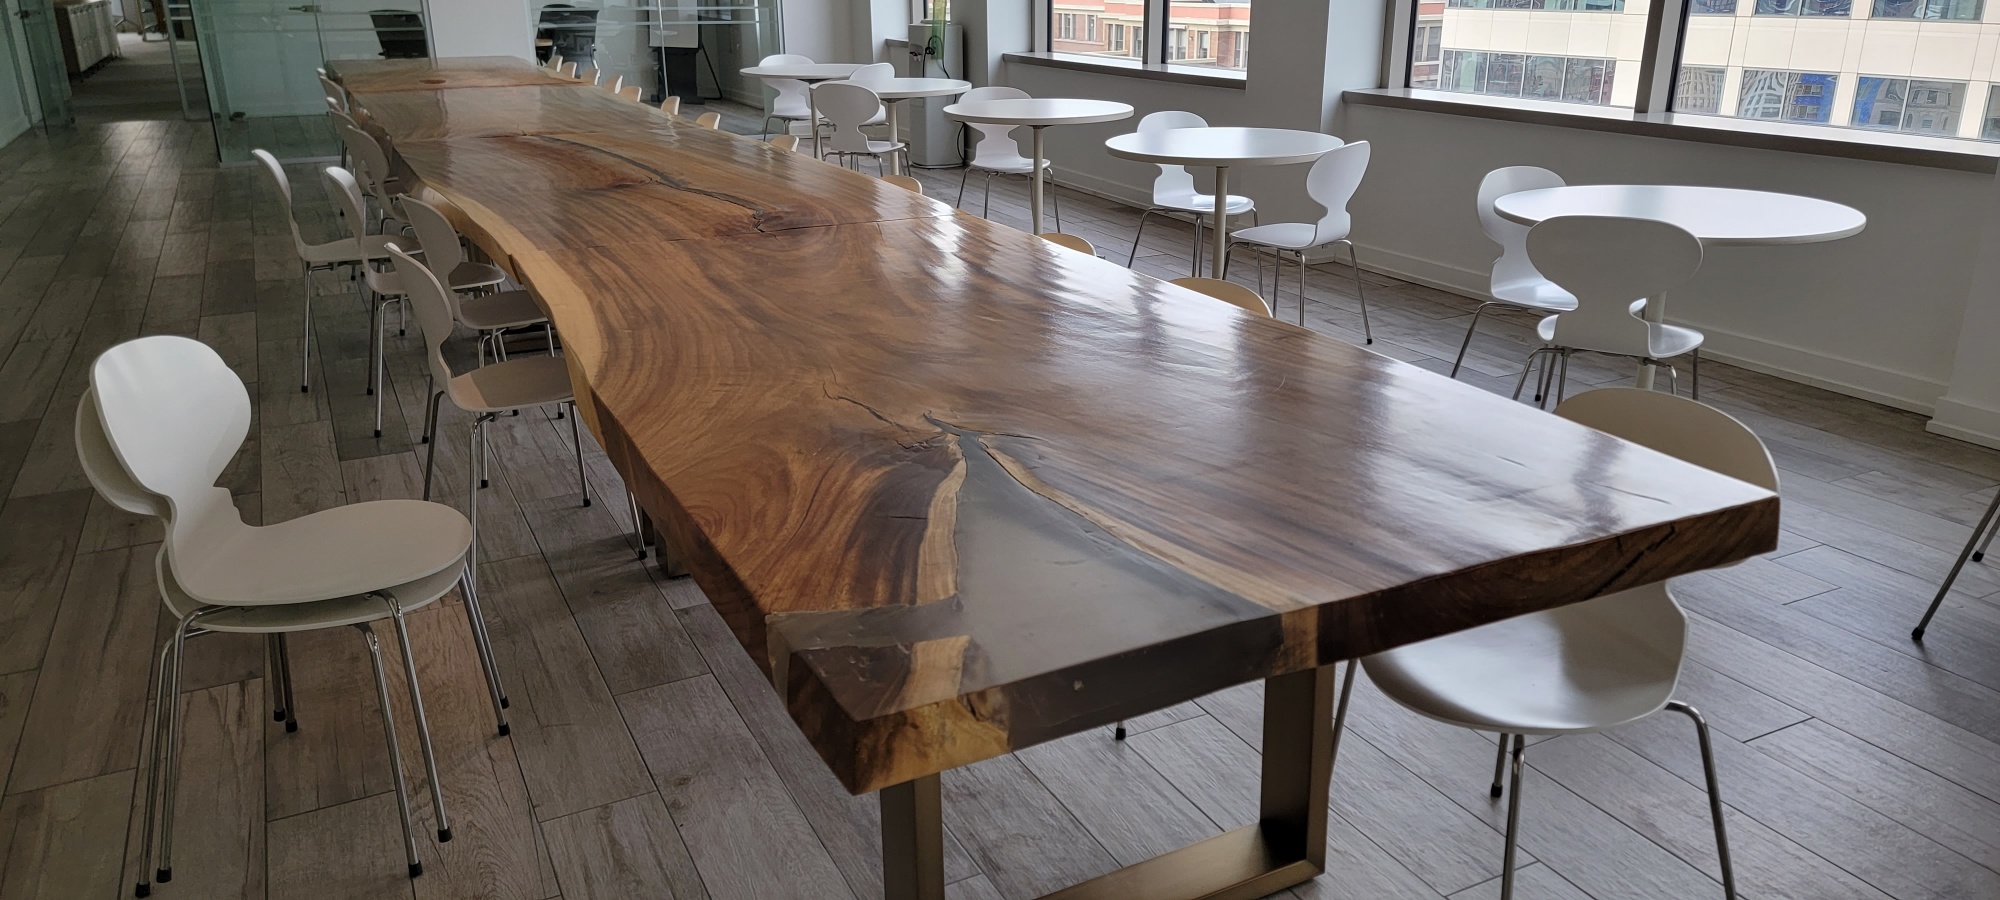 T12282 - Rustic Meeting Table